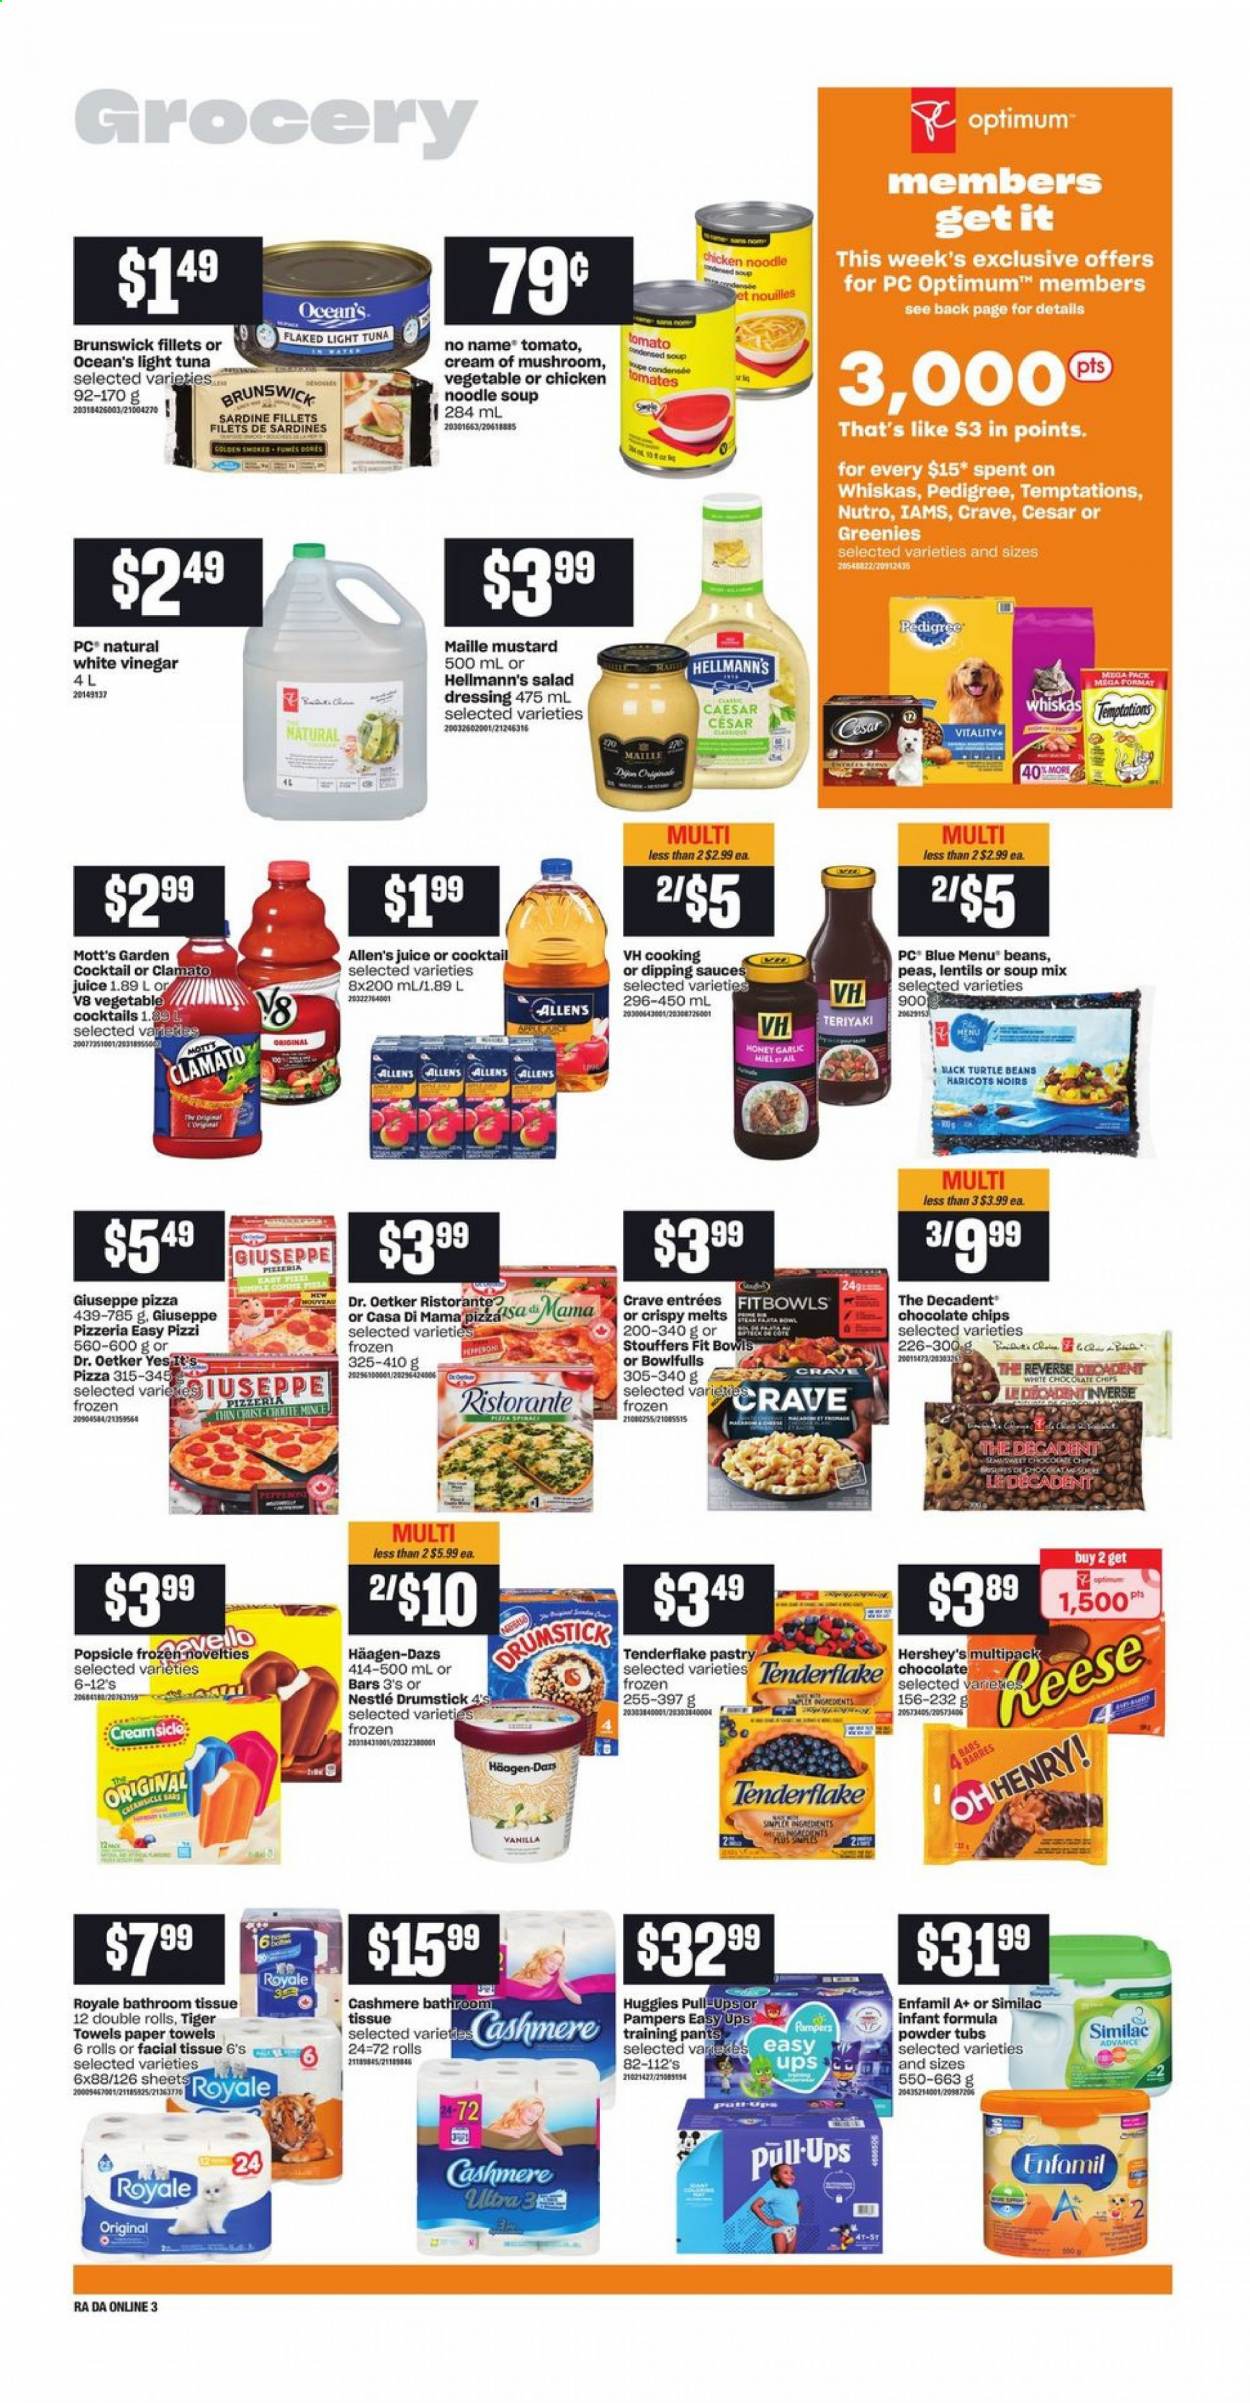 thumbnail - Atlantic Superstore Flyer - April 29, 2021 - May 05, 2021 - Sales products - pita, garlic, Mott's, sardines, tuna, No Name, pizza, soup mix, soup, noodles cup, noodles, pepperoni, Dr. Oetker, Hellmann’s, Hershey's, Häagen-Dazs, white chocolate, lentils, light tuna, mustard, salad dressing, dressing, honey, juice, Clamato, Enfamil, Similac, pants, baby pants, bath tissue, kitchen towels, paper towels, Greenies, Optimum, Pedigree, Iams, Nestlé, Huggies, Pampers. Page 7.